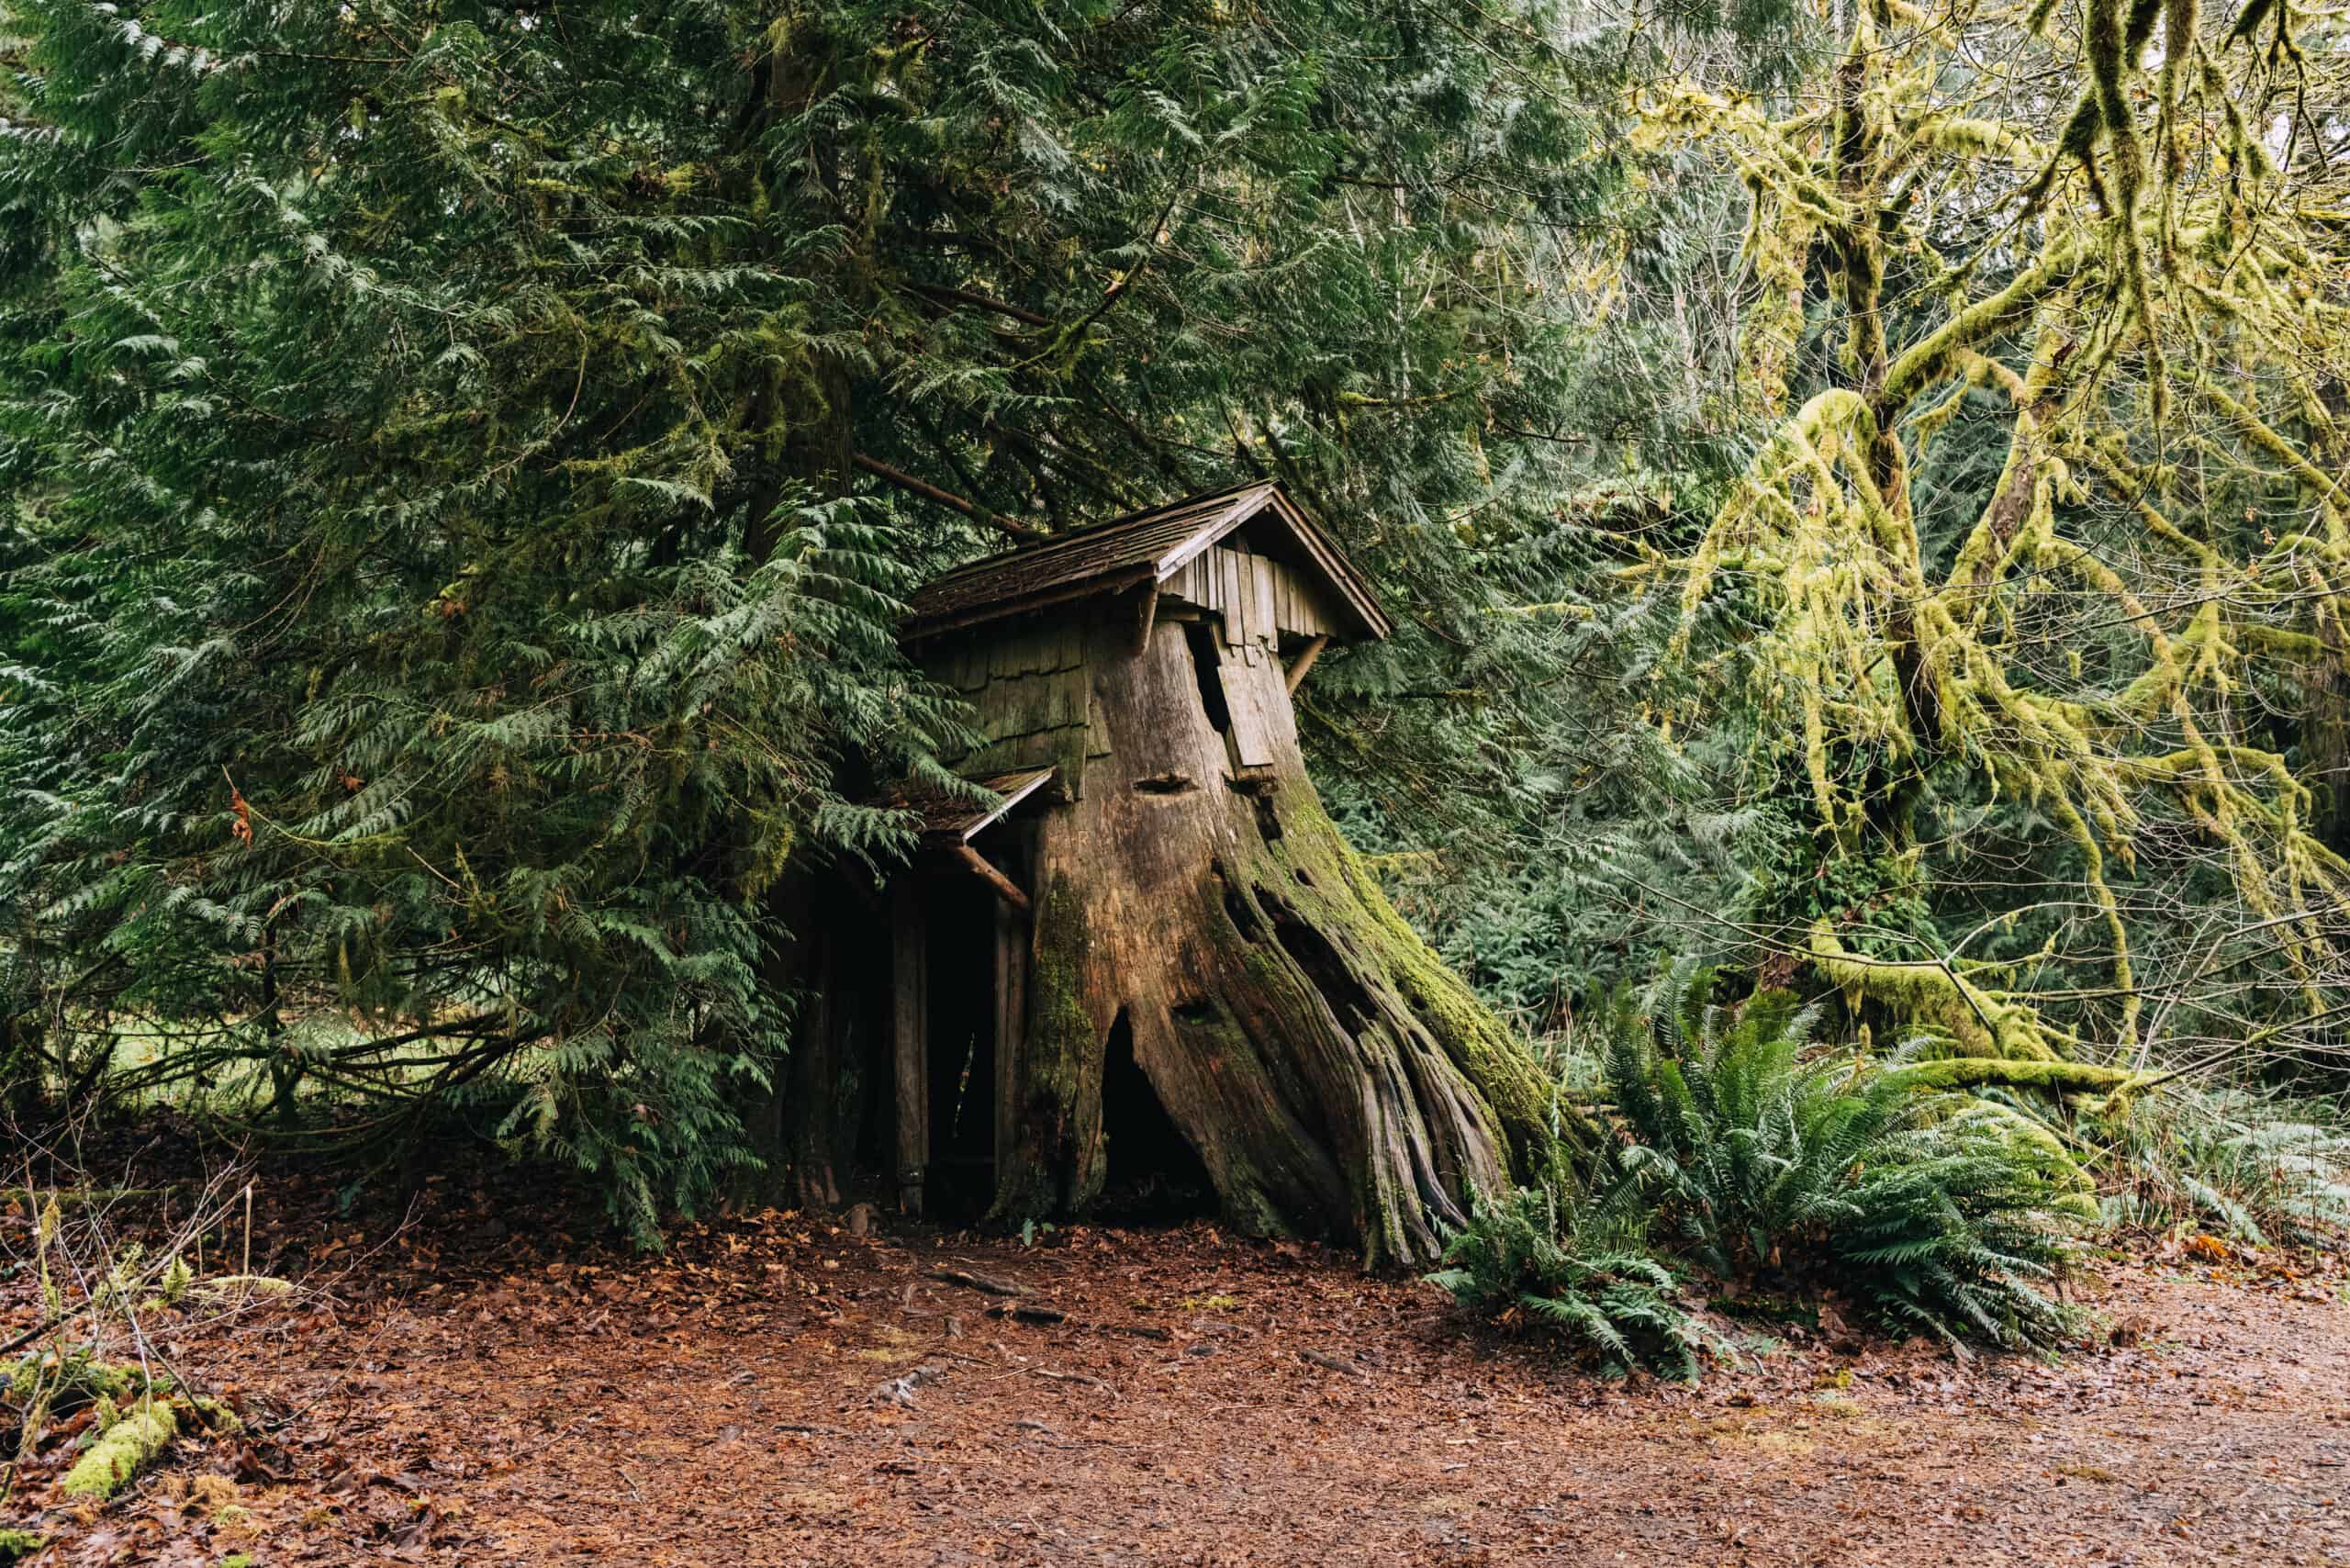 The Stump House: How To Find This Hidden Washington Gem